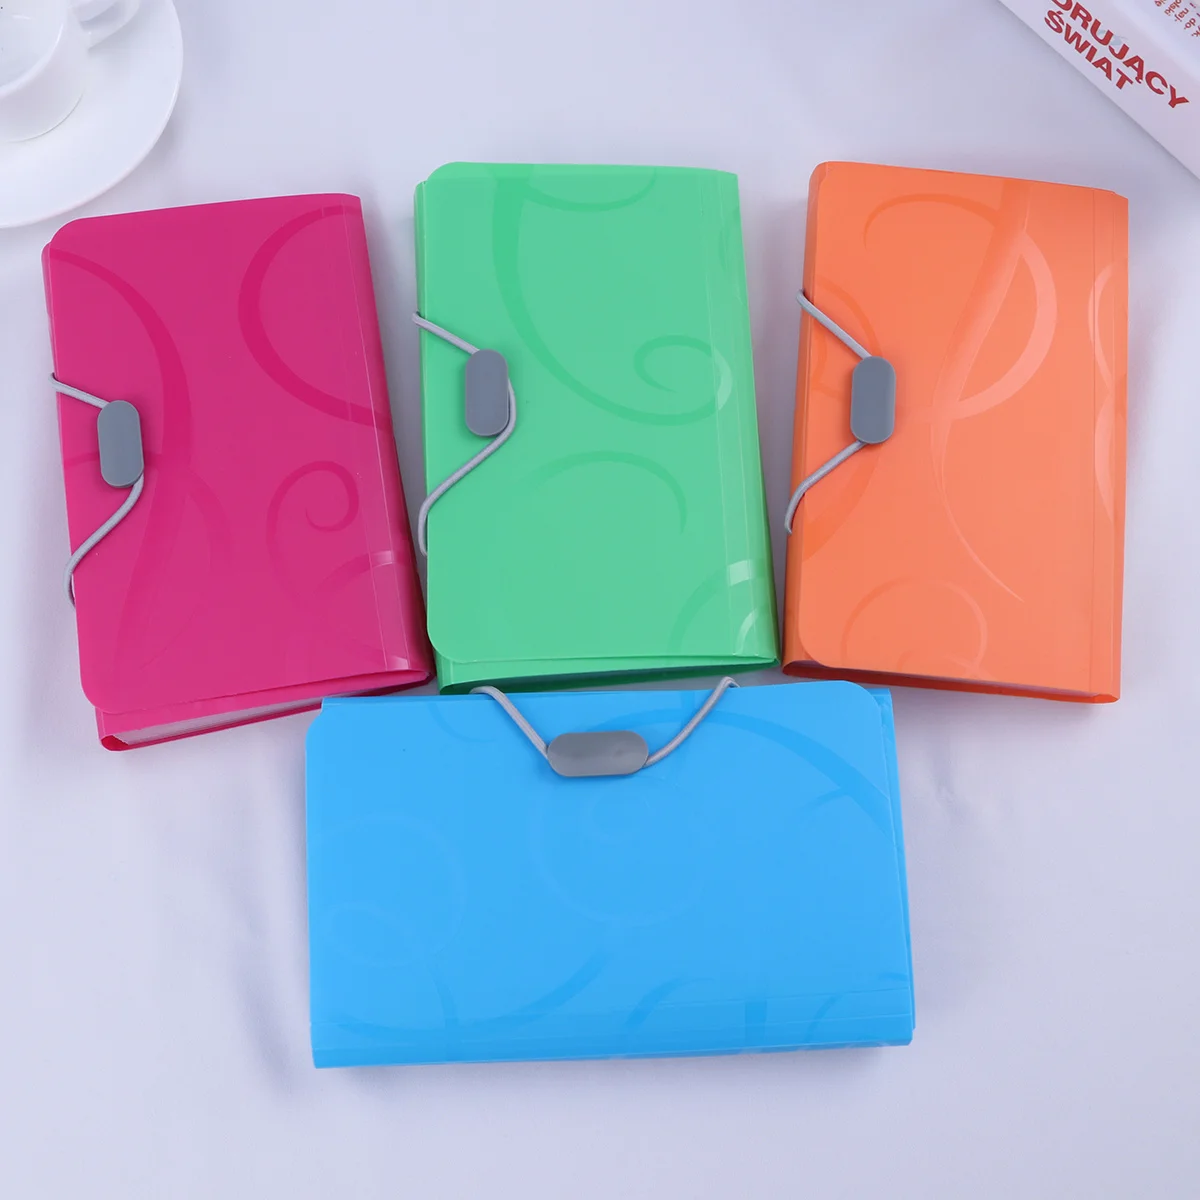 

4pcs Expanding File Folder Accordin File Organizer Portable Multilayer Document Holder for Receipts Coupon Checks Office Filing